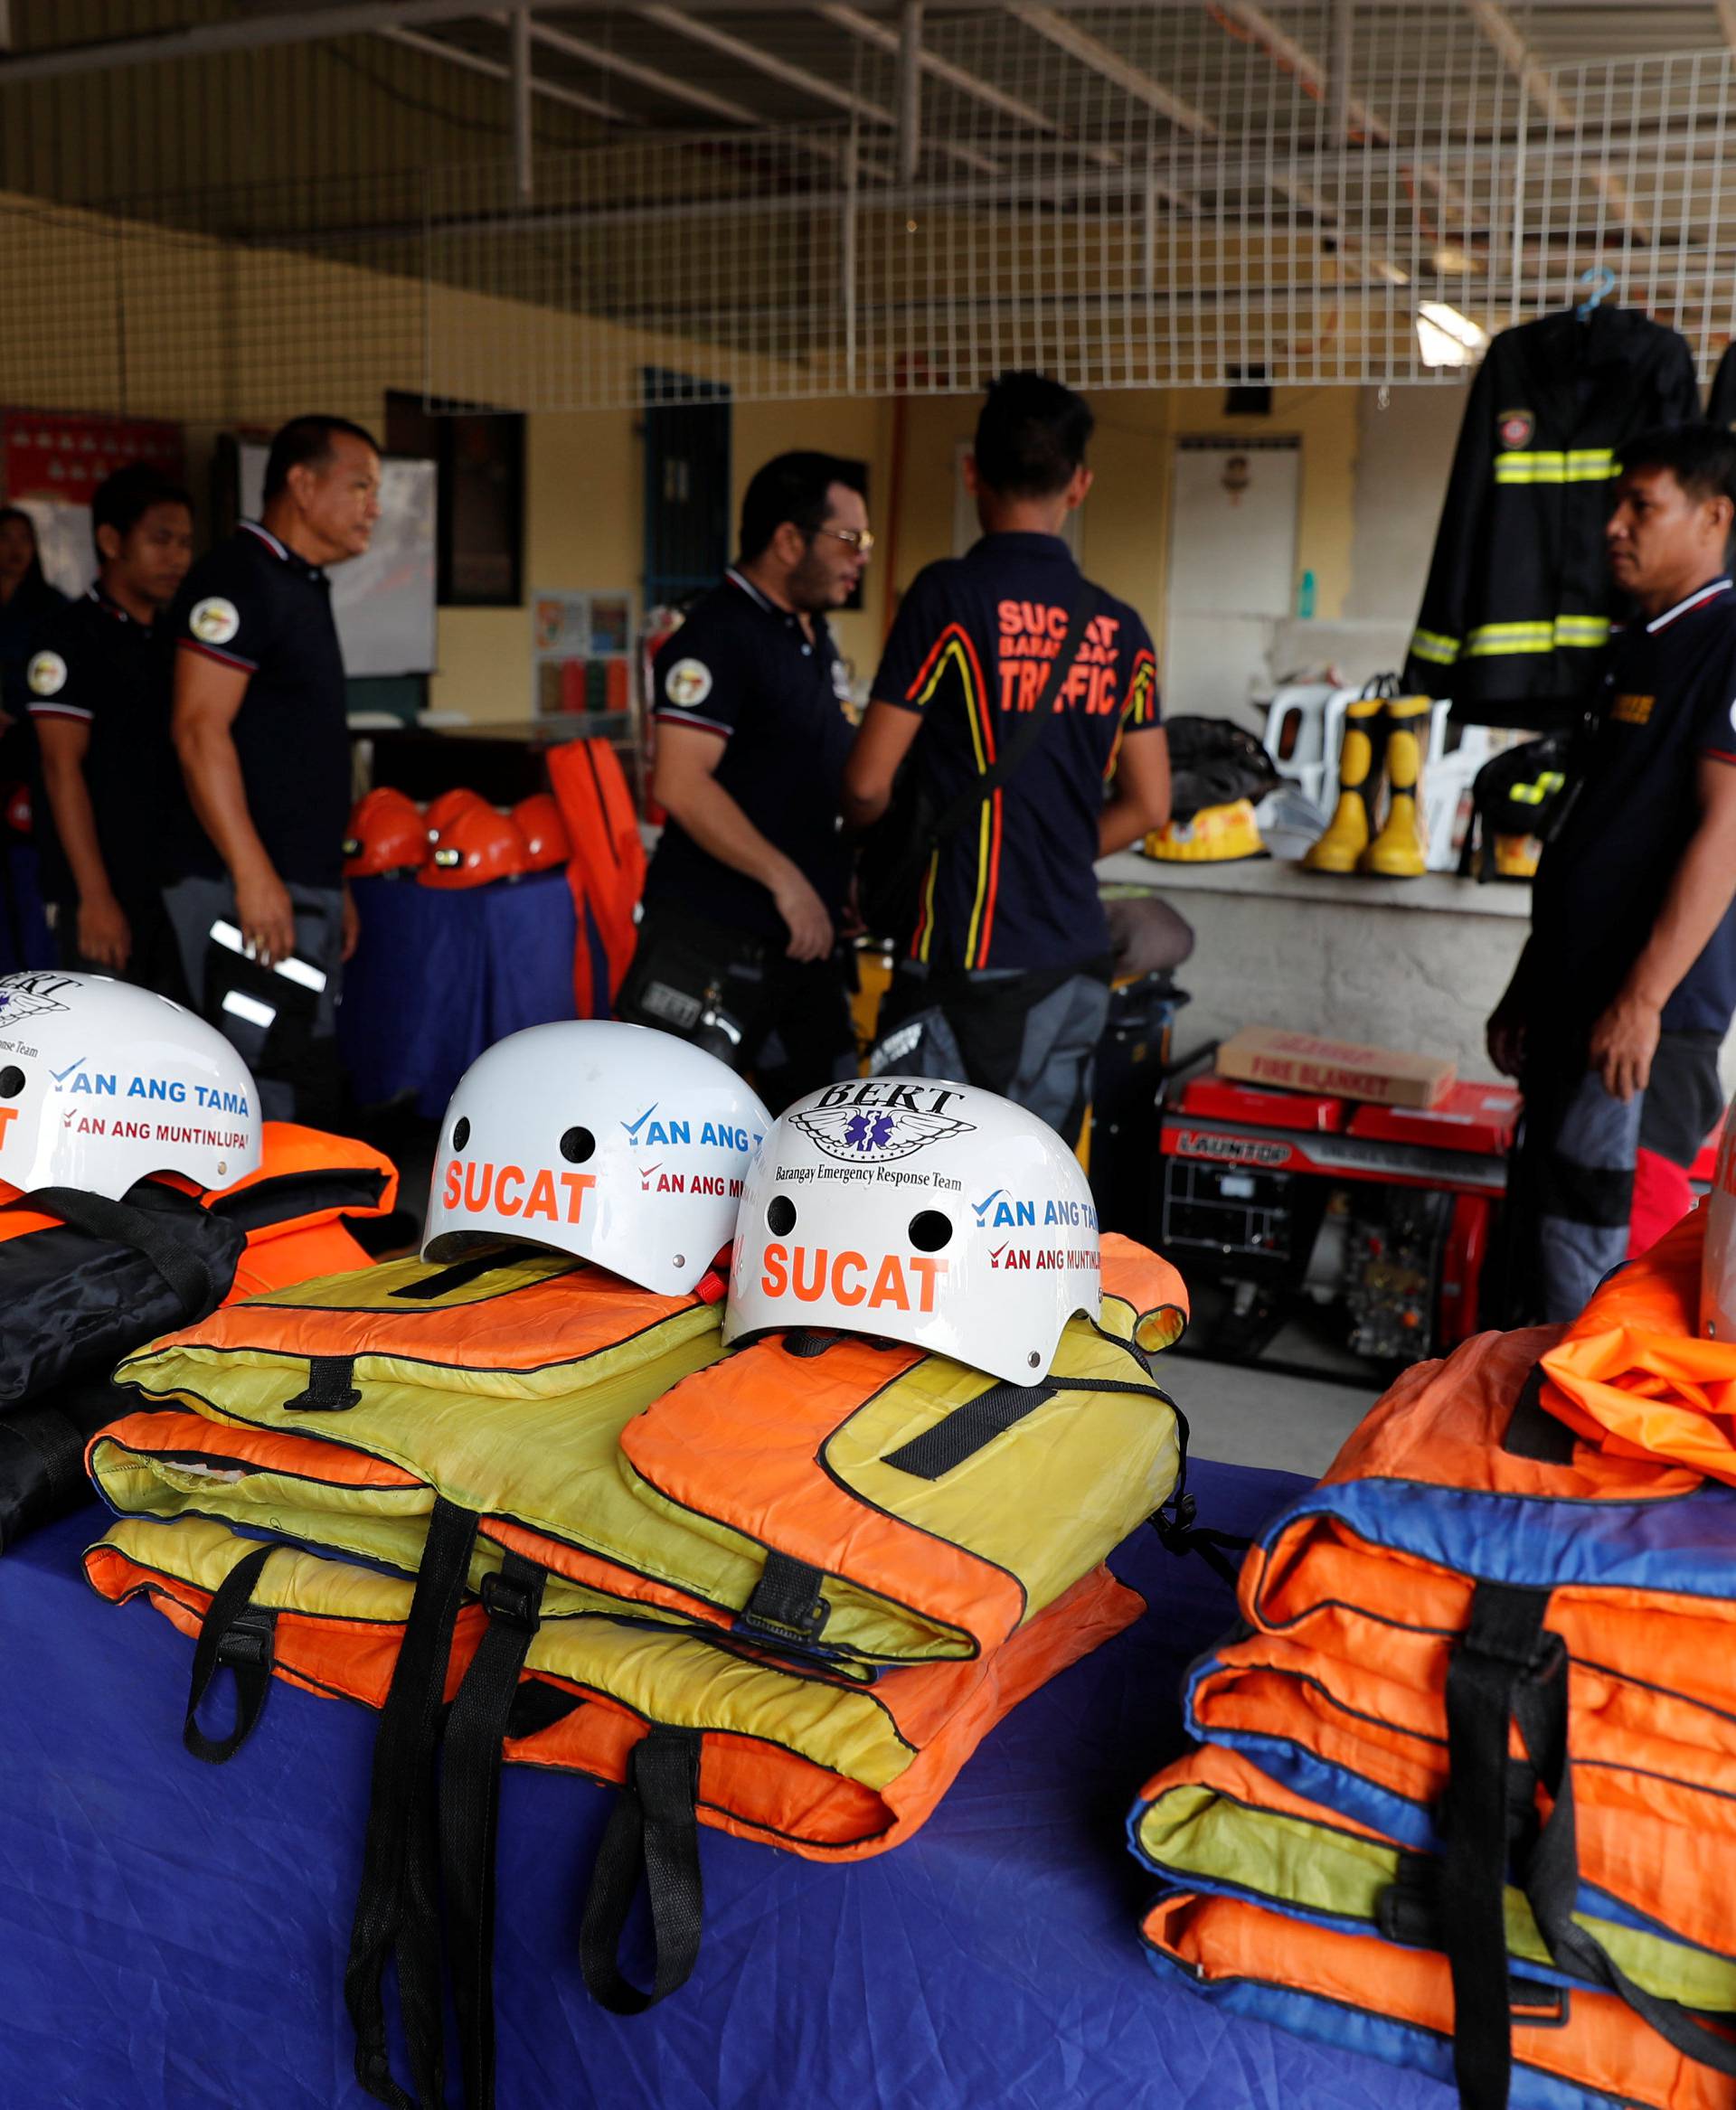 Rescuers ready their gear before Super Typhoon Mangkhut hits the main island of Luzon, in Muntinlupa